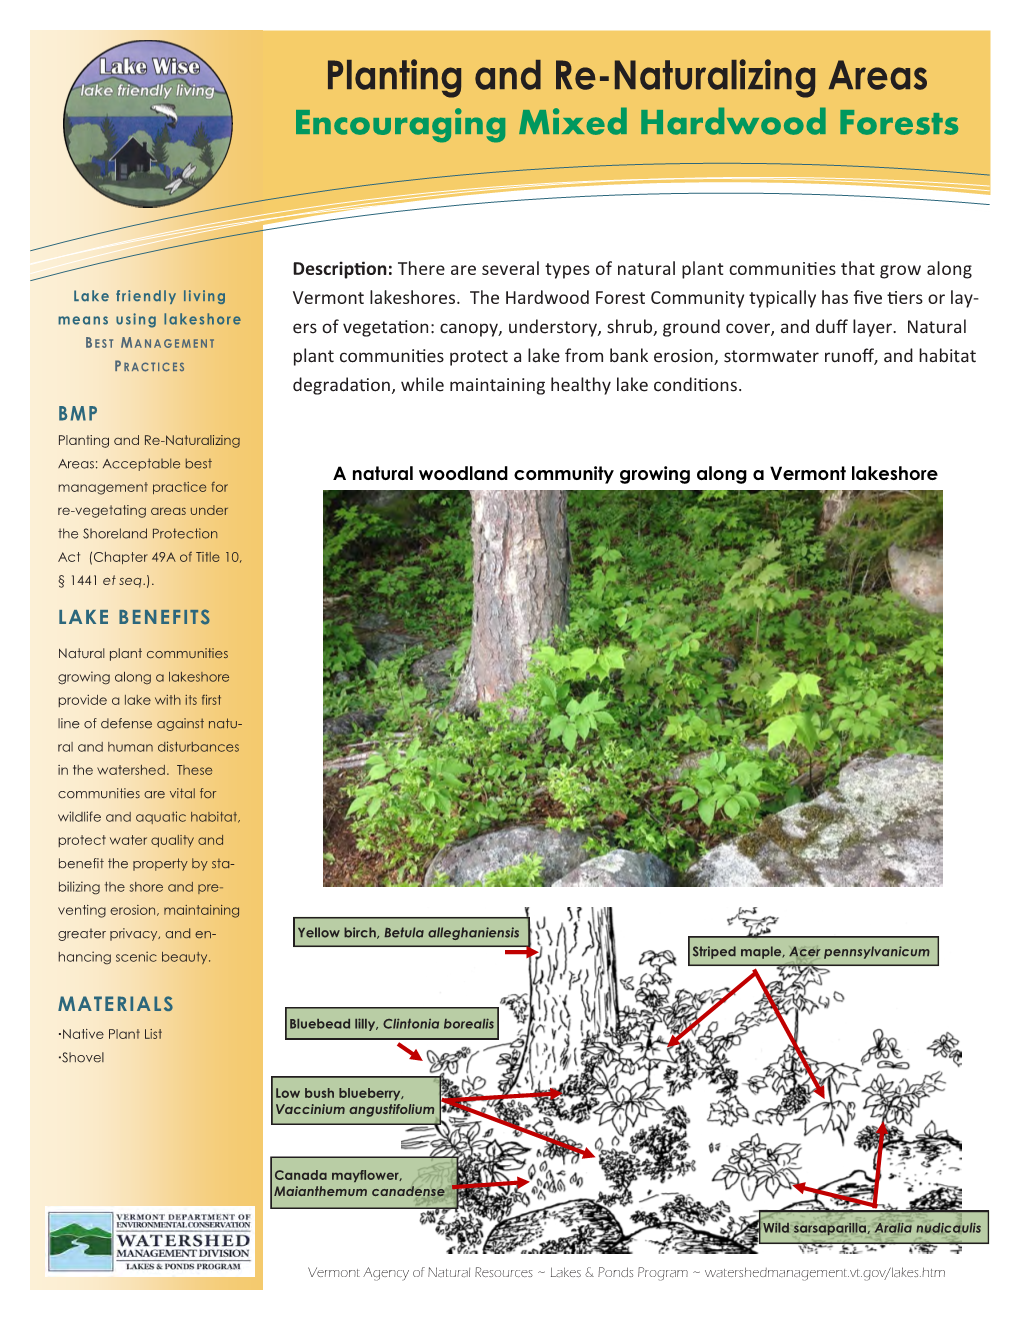 Encouraging Mixed Hardwood Forests